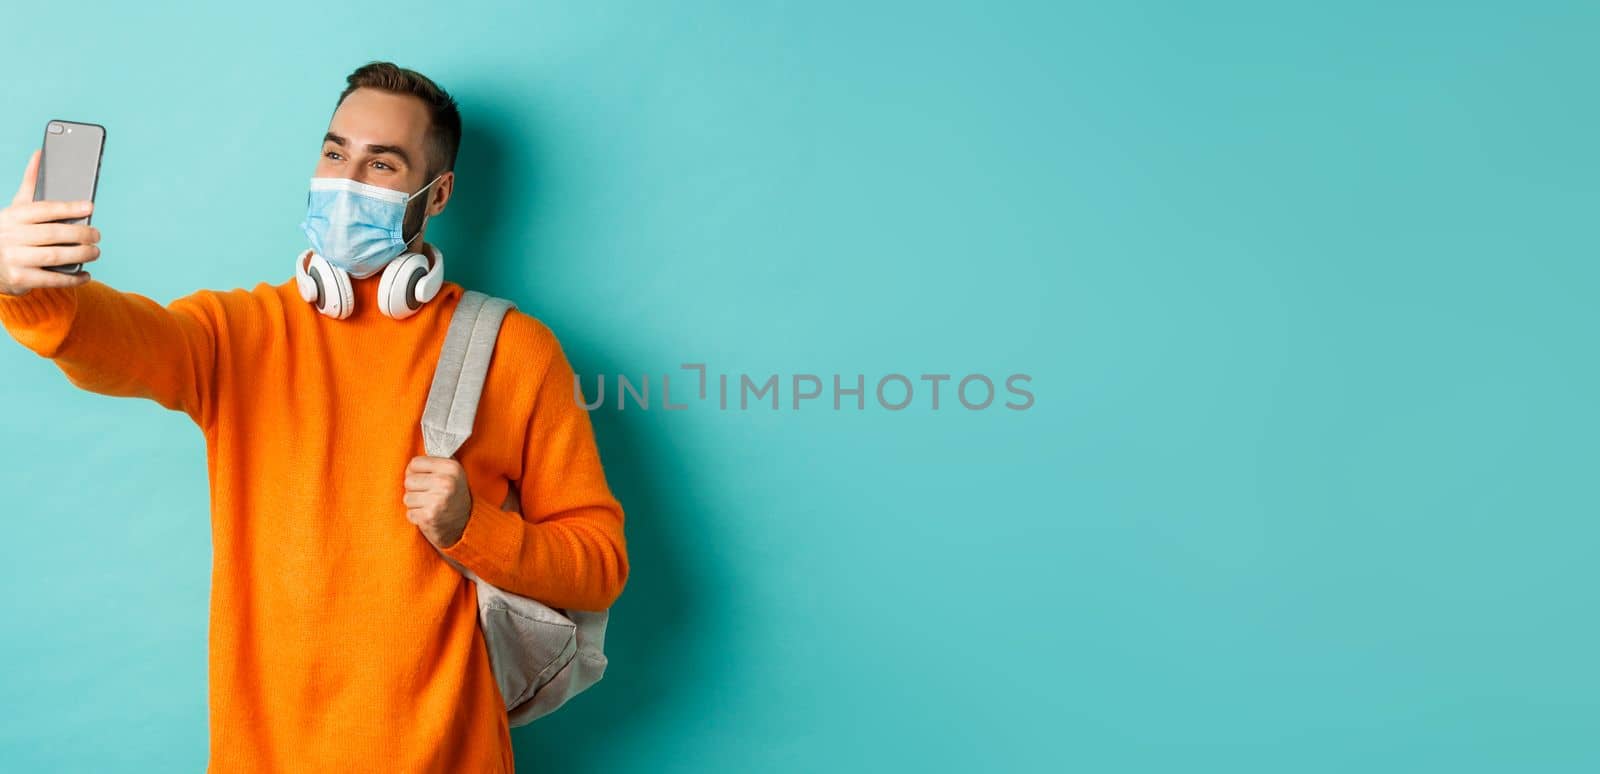 Young modern man with headphones and backpack, taking selfie on mobile phone in medical mask, standing over light blue background.